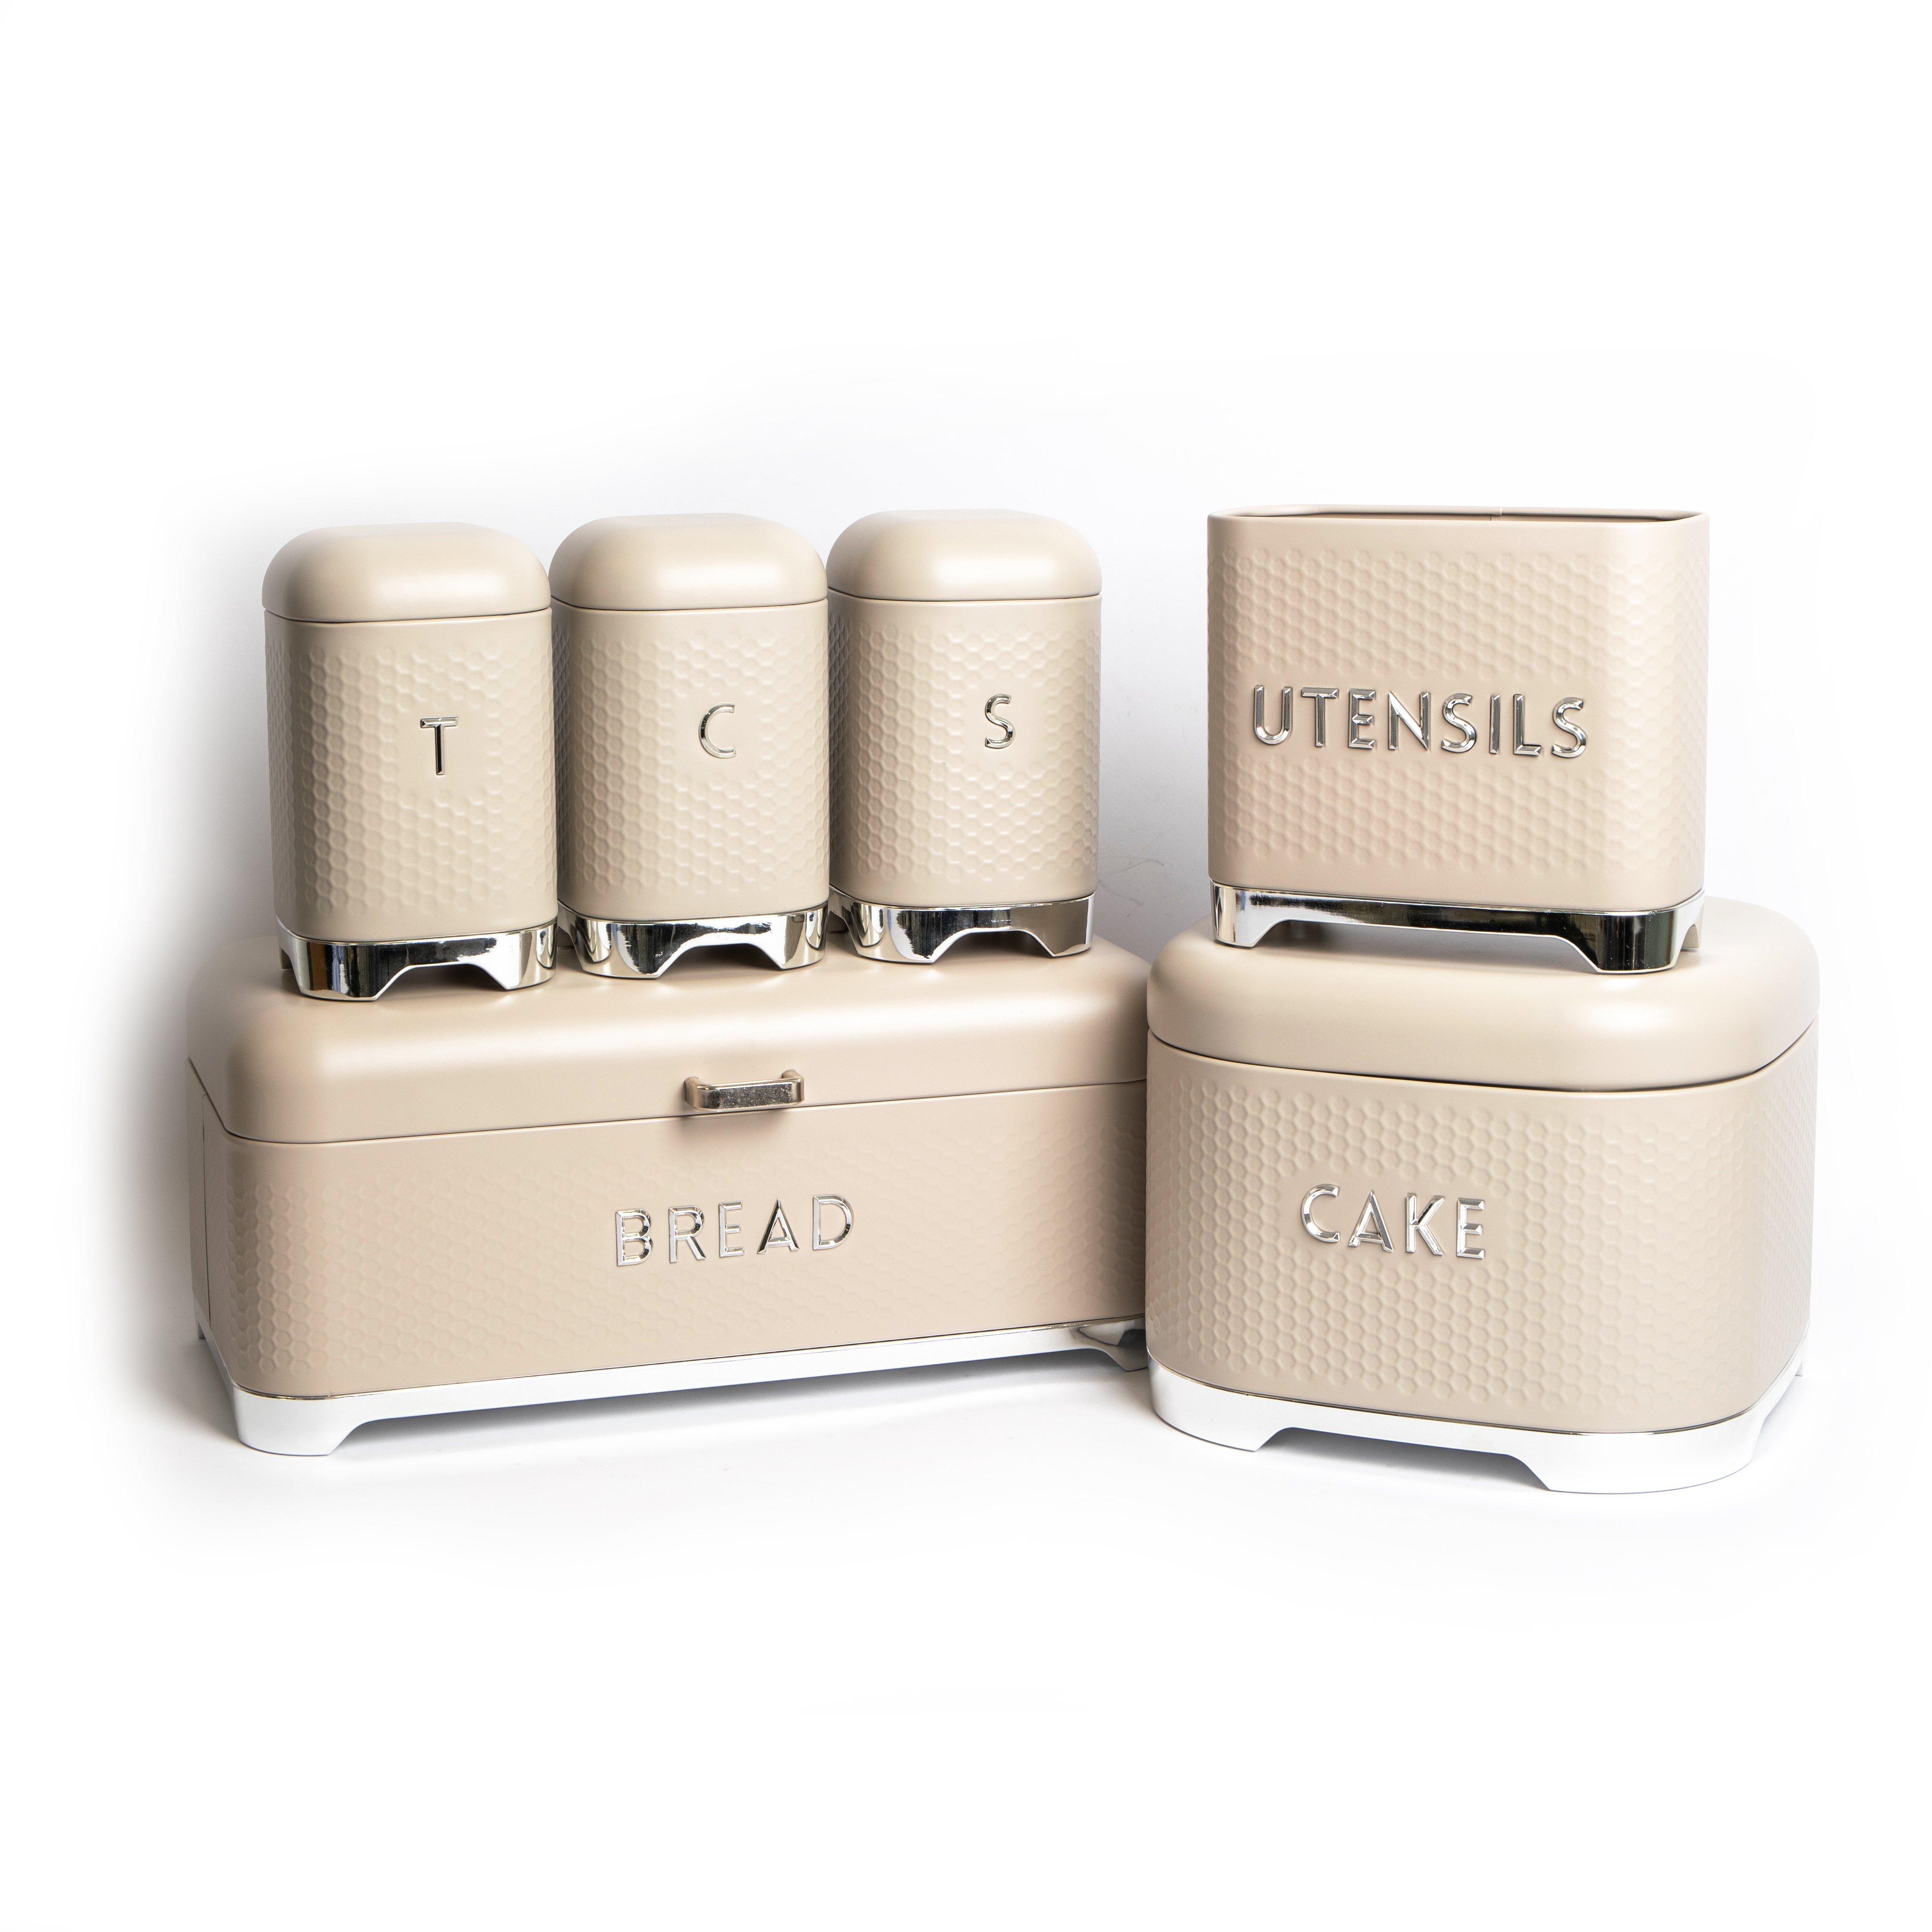 6pc Gift-Boxed Iced Latte Storage Set with Tea, Coffee & Sugar Canisters, Utensil Store, Cake Tin an